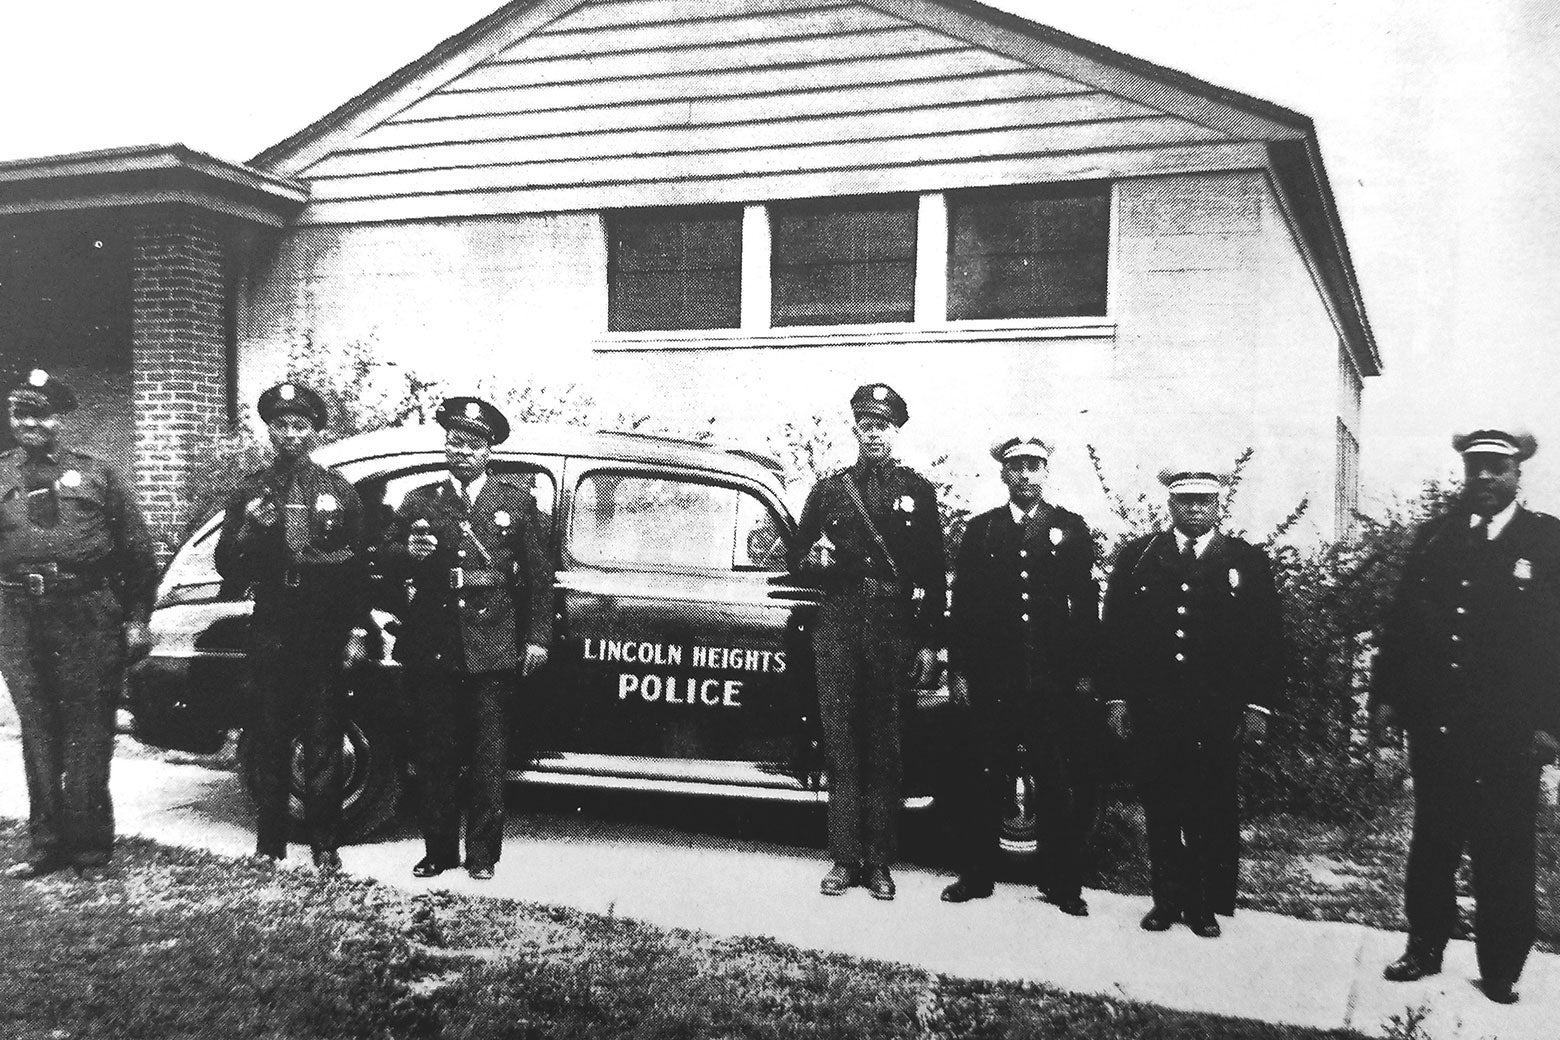 Seven men in police uniforms stand in front of a low building and a car with "Lincoln Heights Police" written on its door.